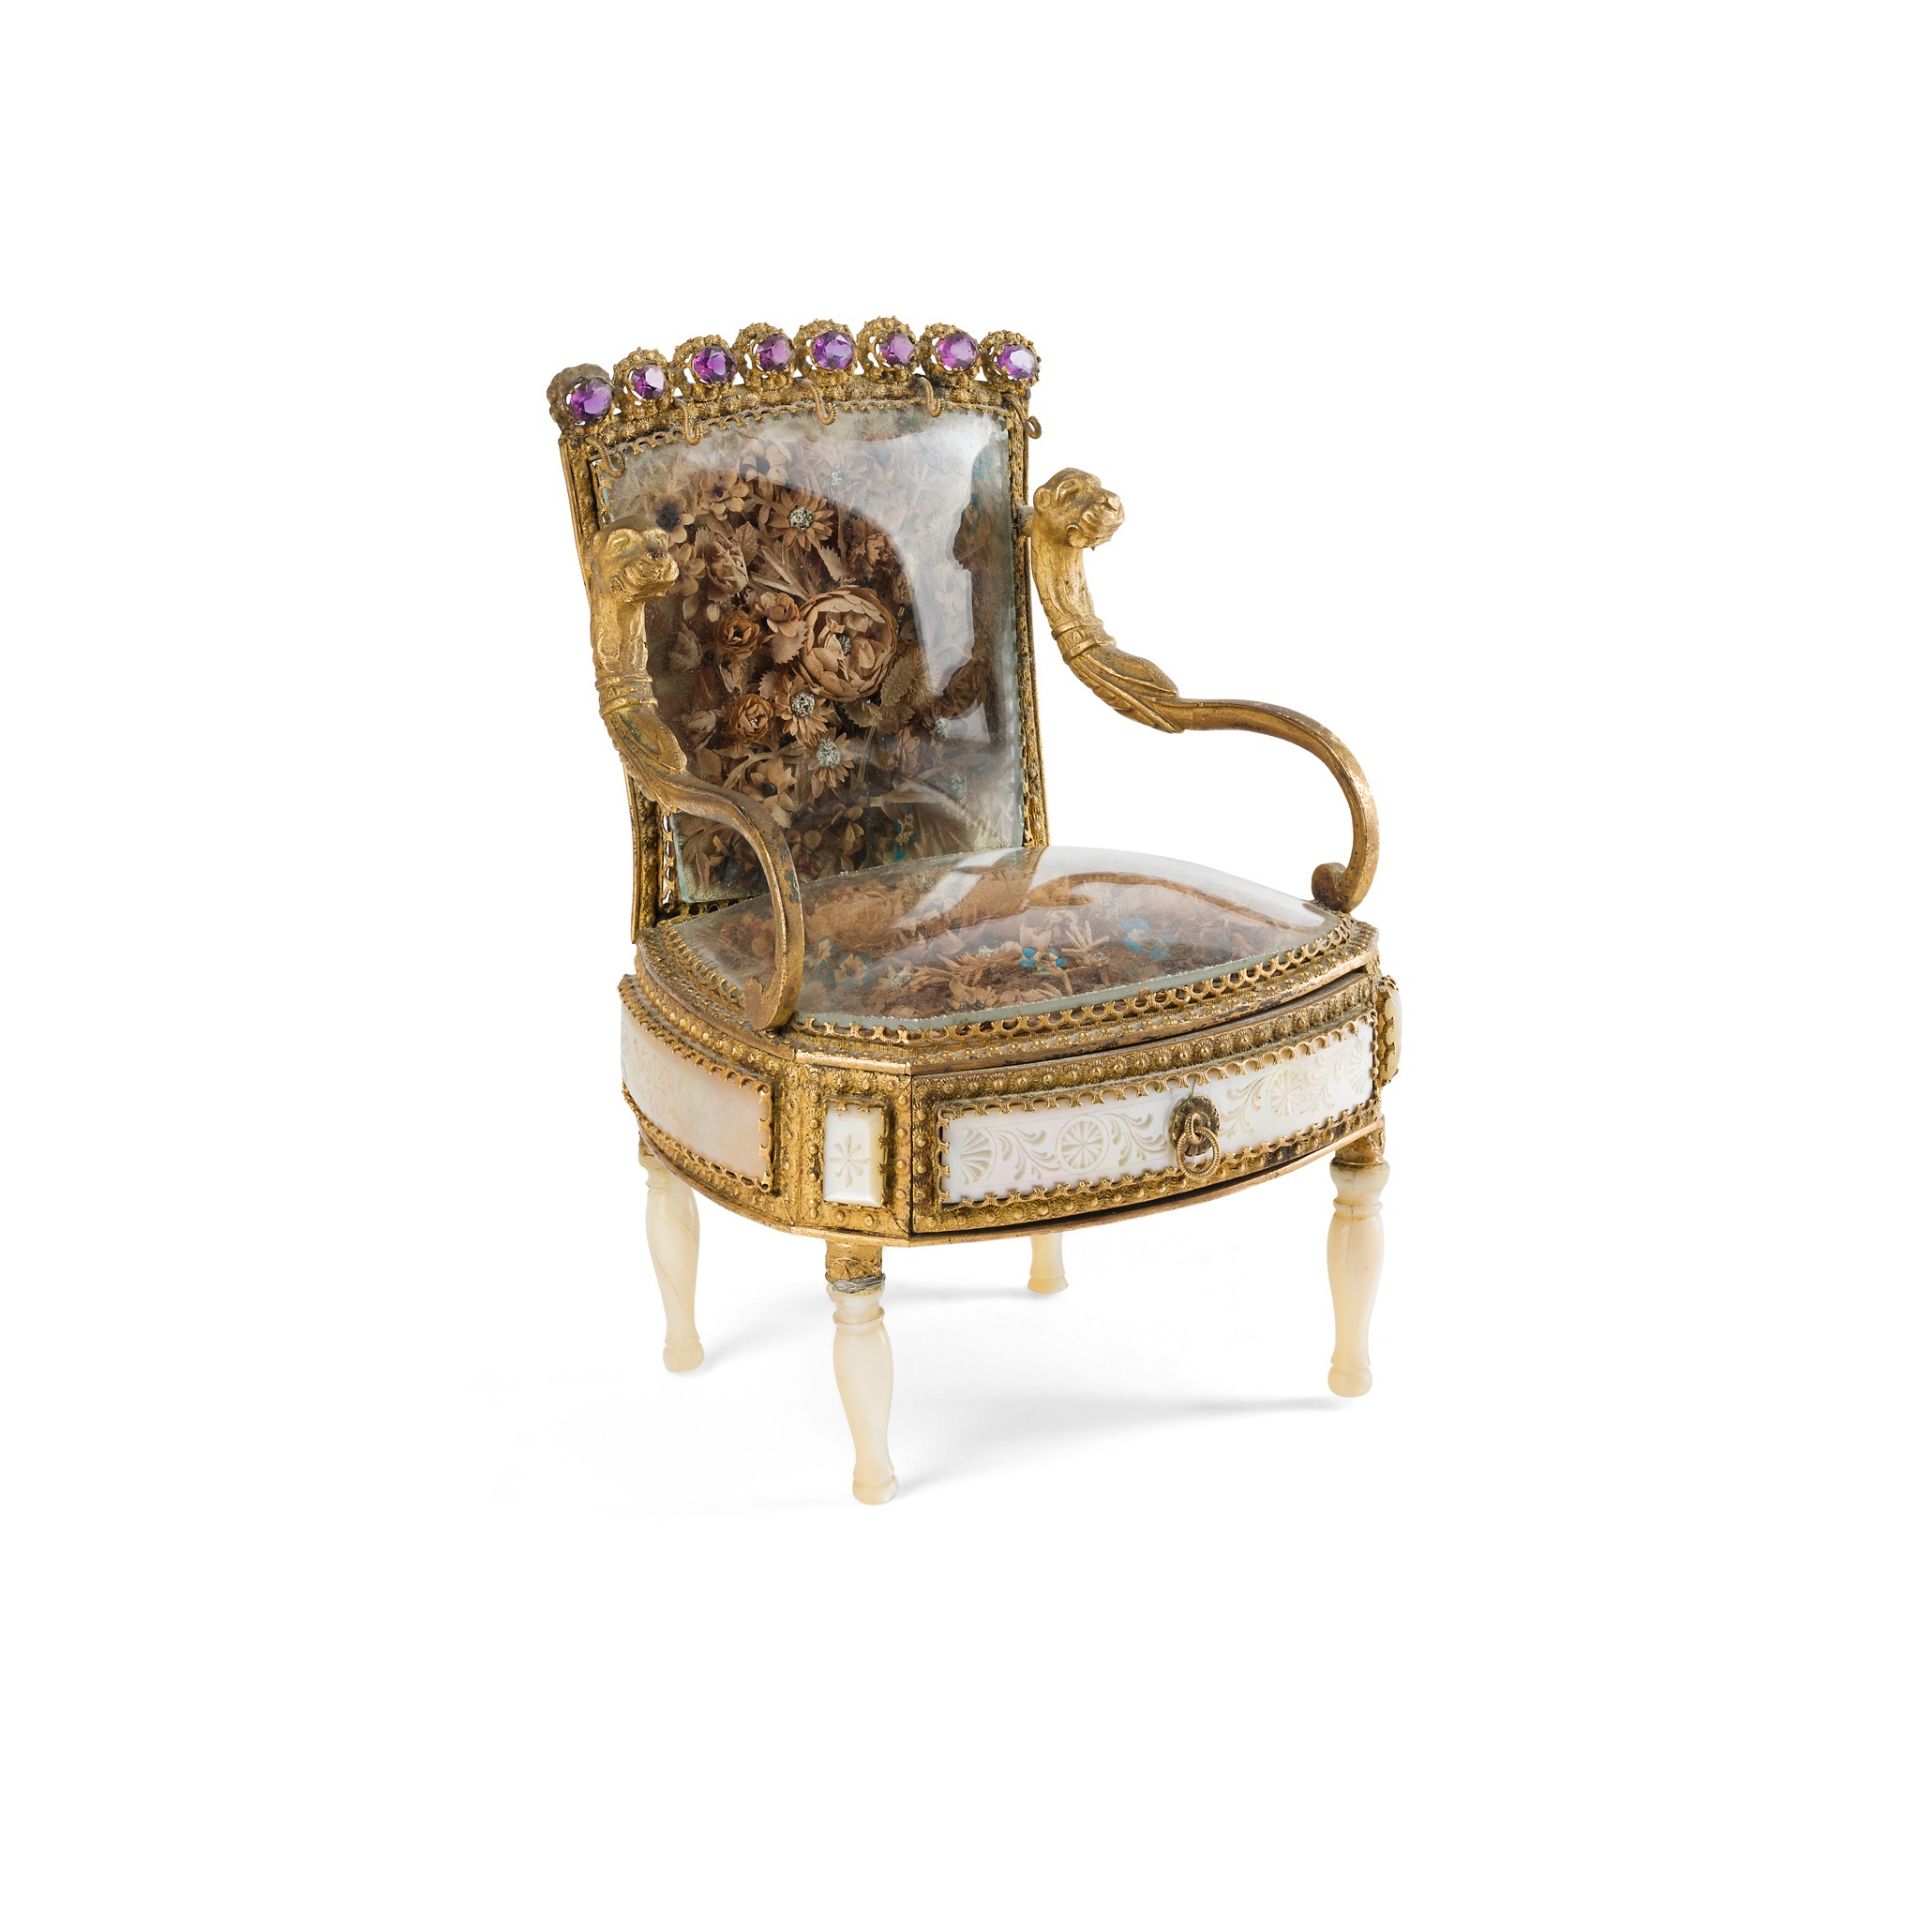 FRENCH PALAIS ROYALE GILT METAL AND GLASS MINIATURE CHAIR 19TH CENTURY